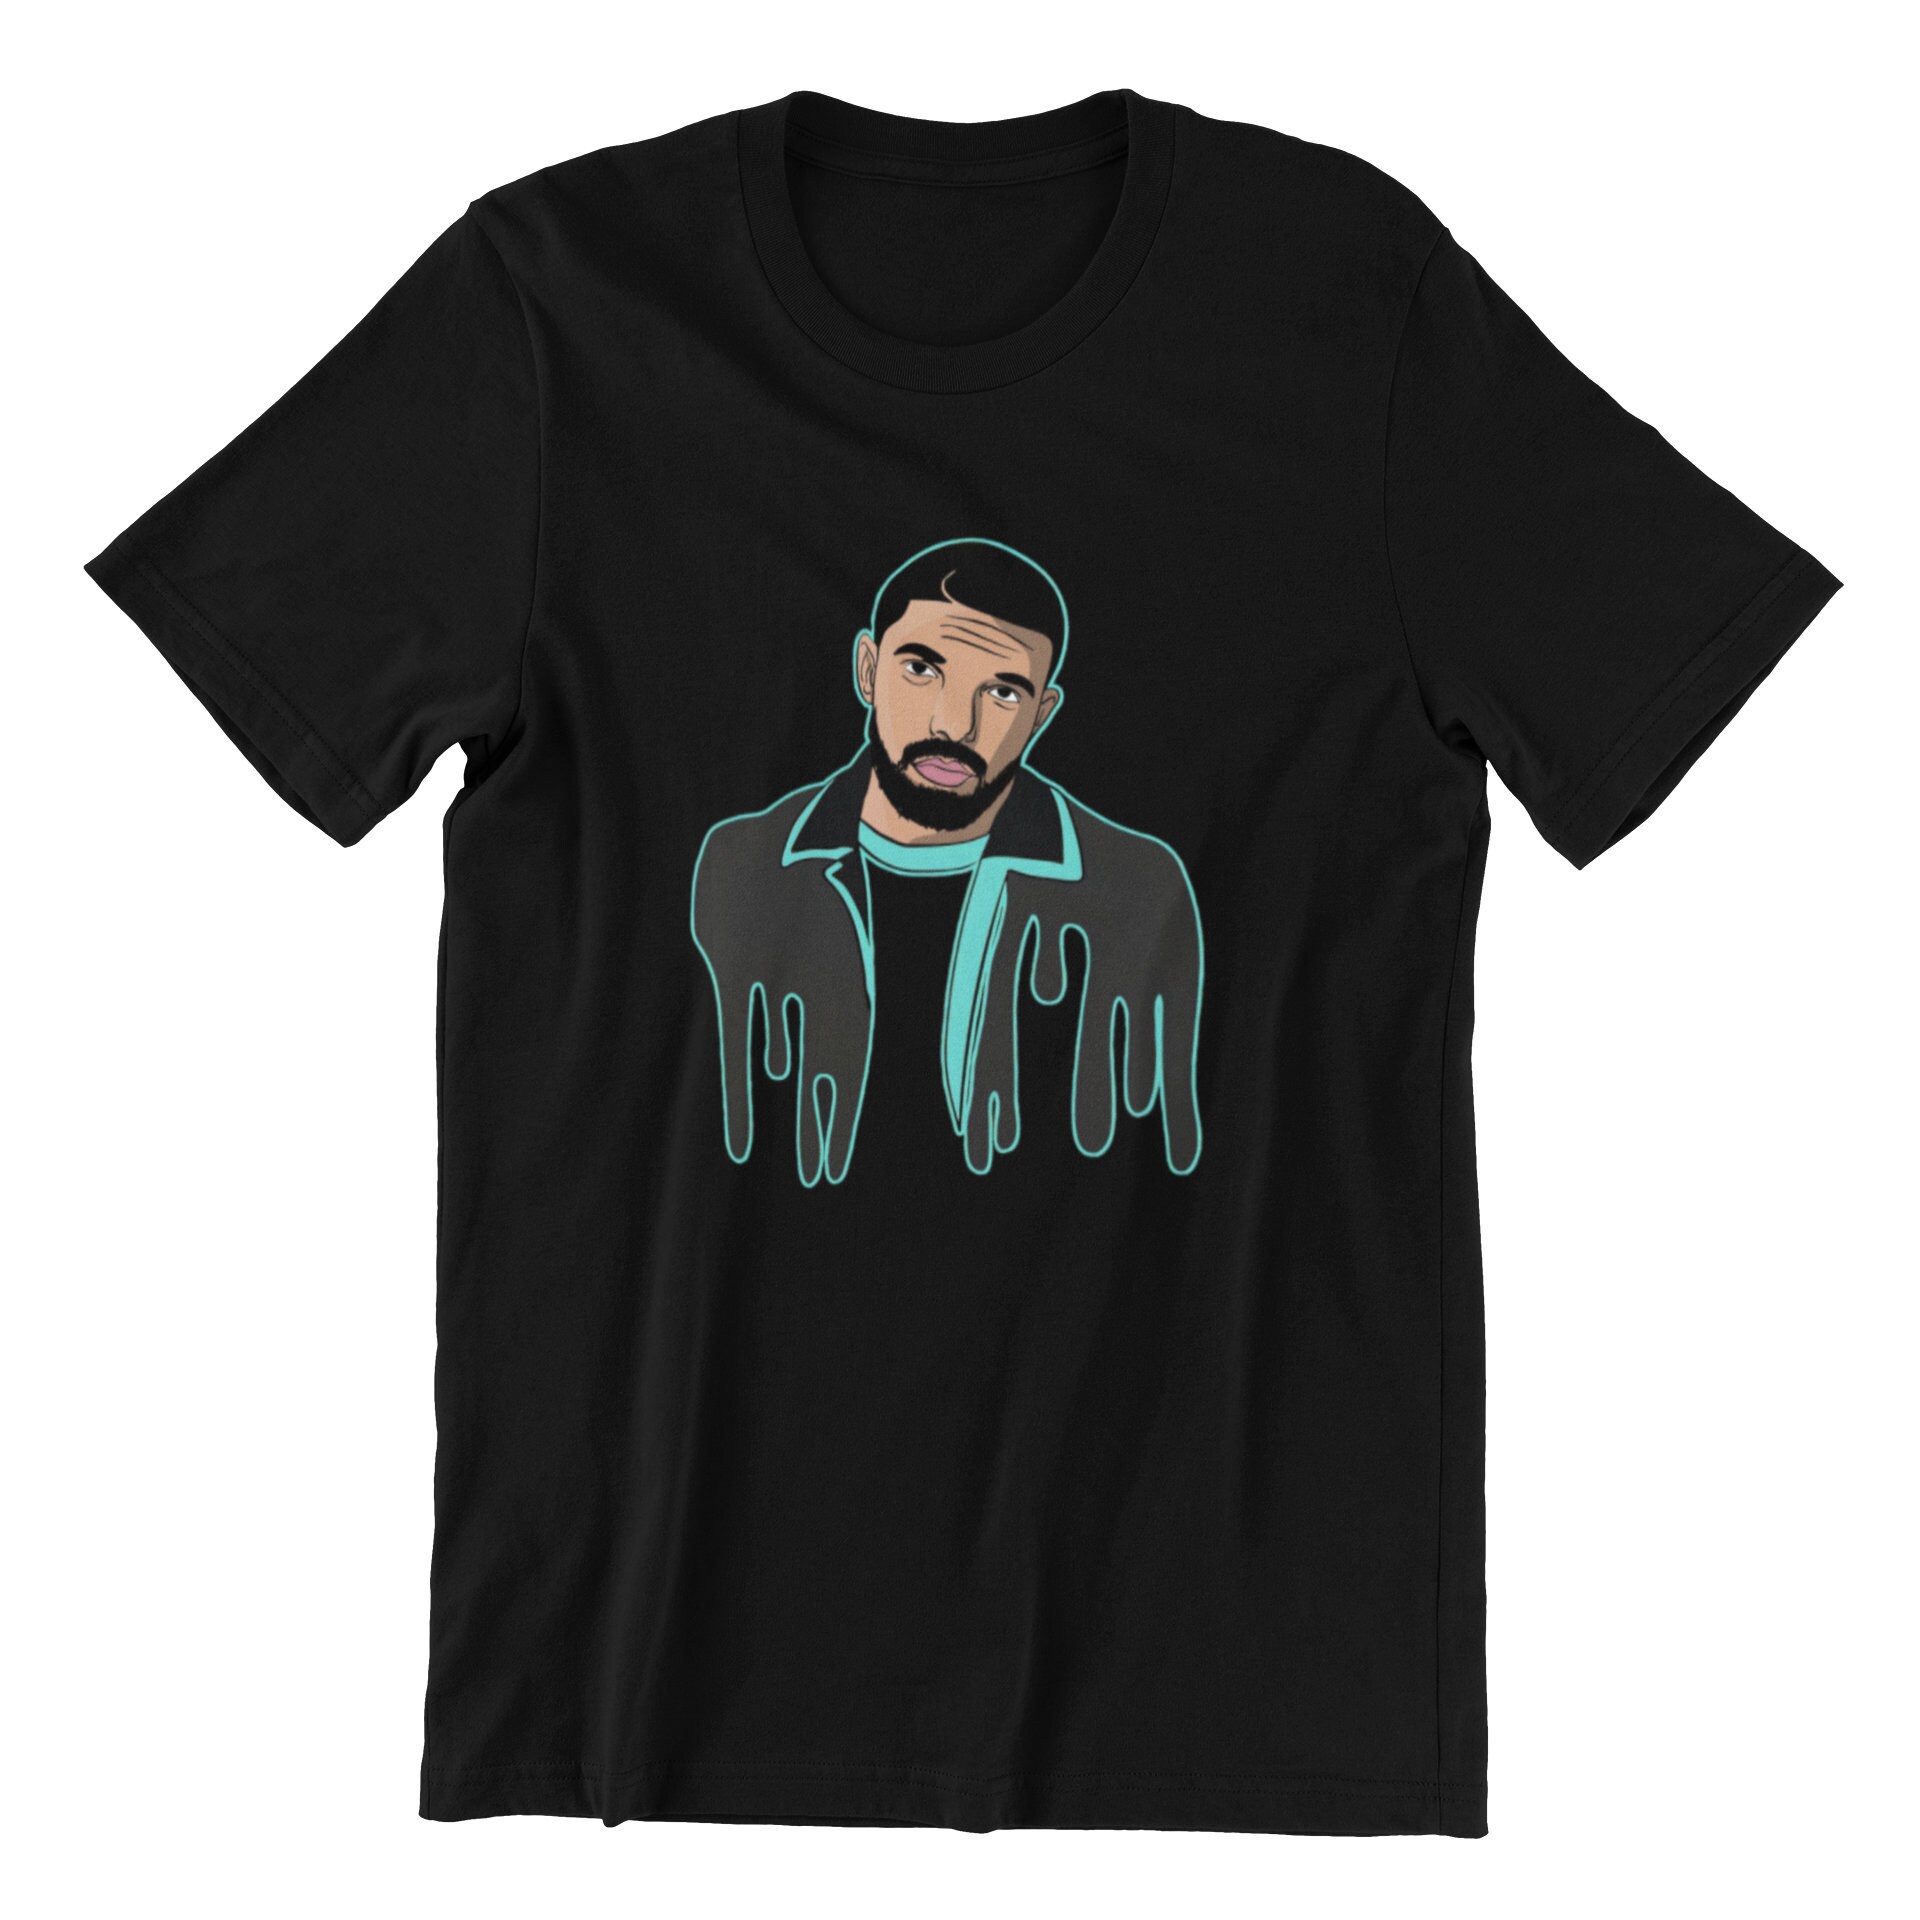 Drake Merch gifts graphic art tee shirt poster album covers | Etsy